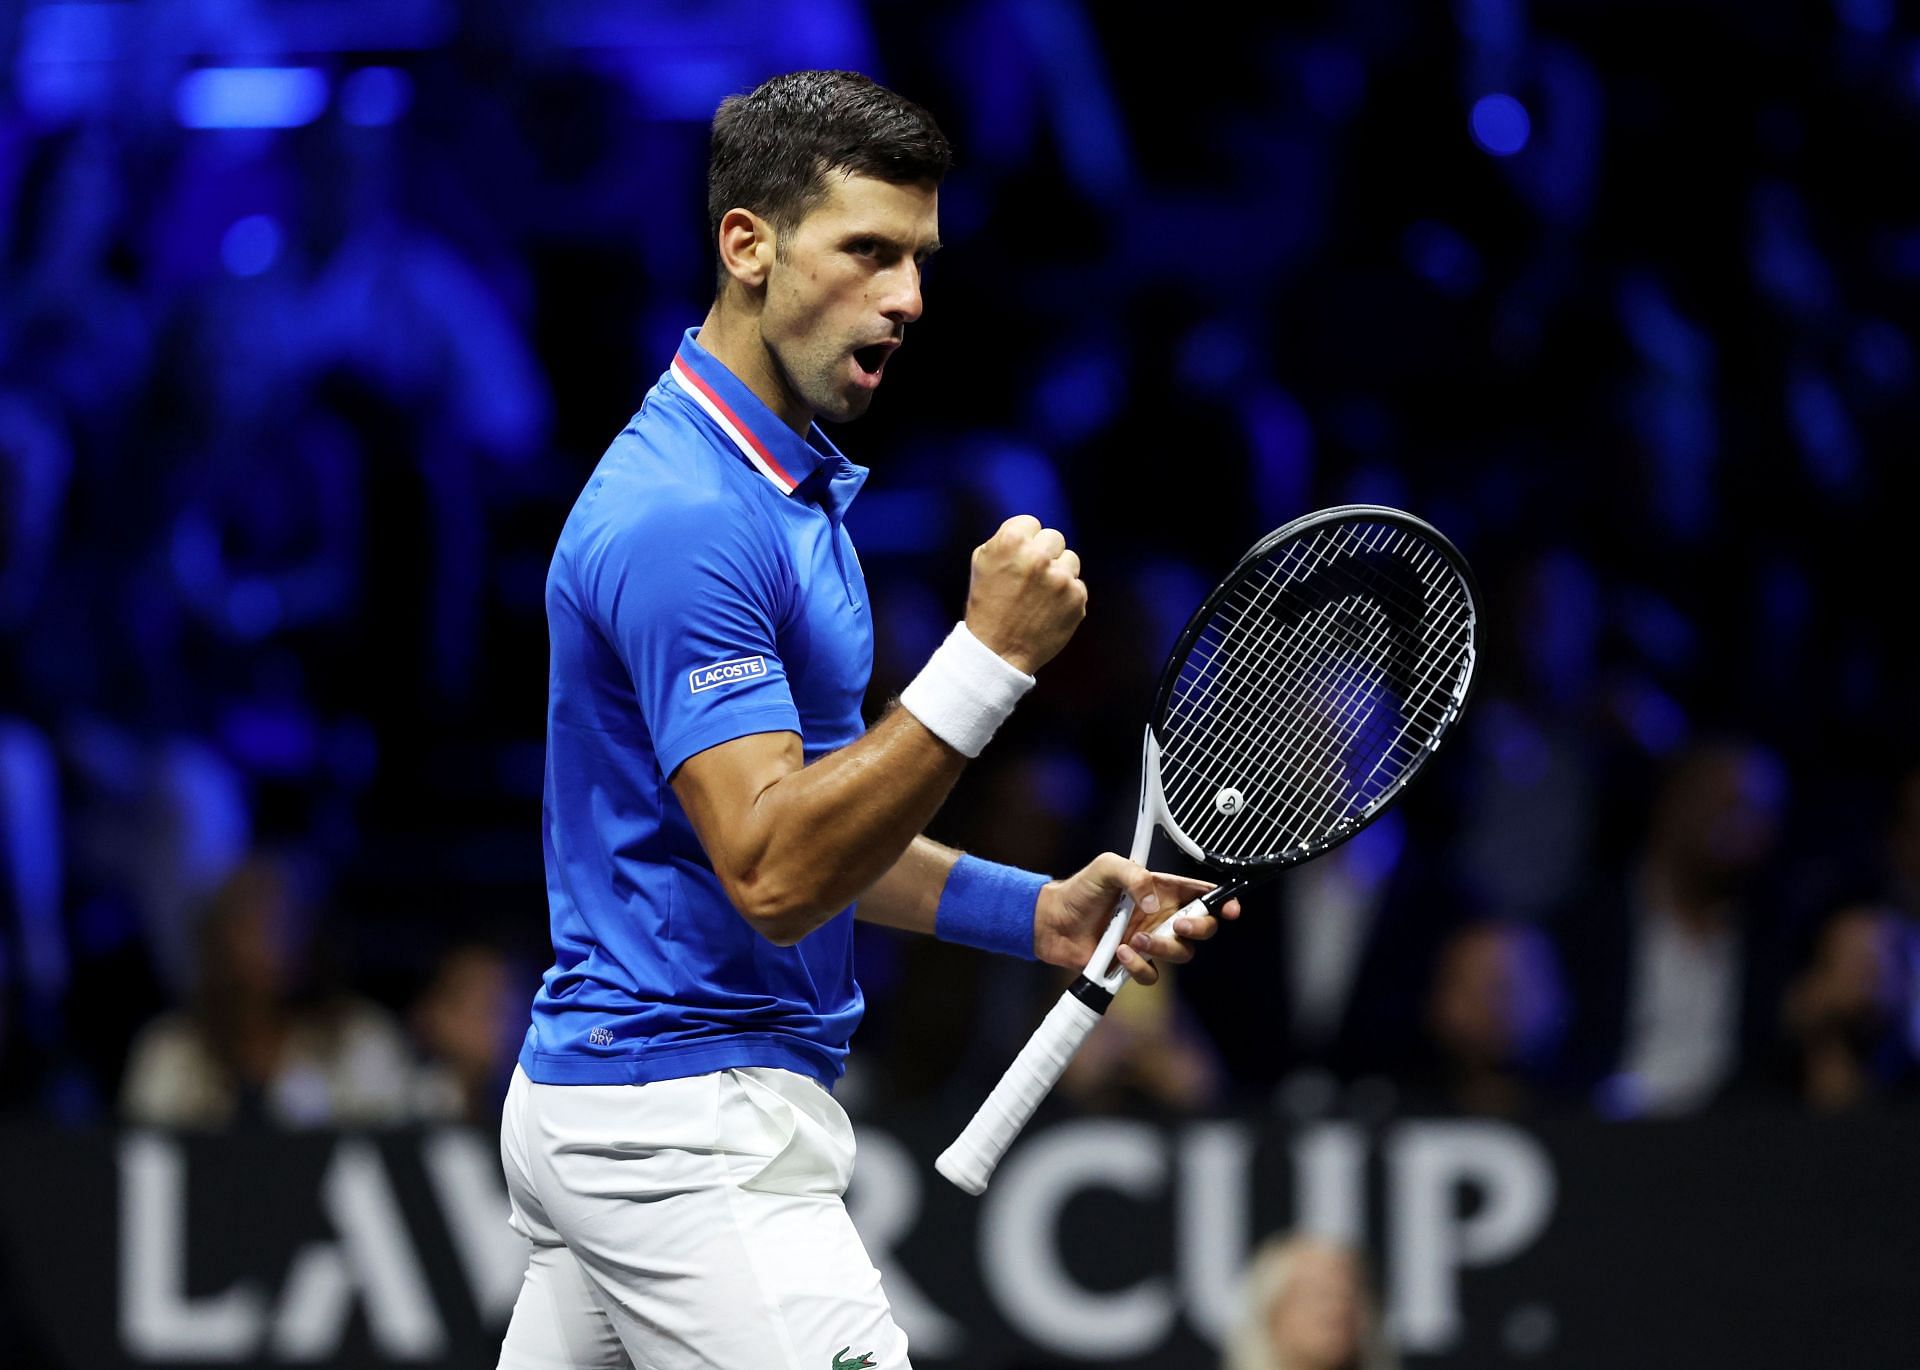 Novak Djokovic at Laver Cup 2022. Photo by Clive Brunskill/Getty Images for Laver Cup